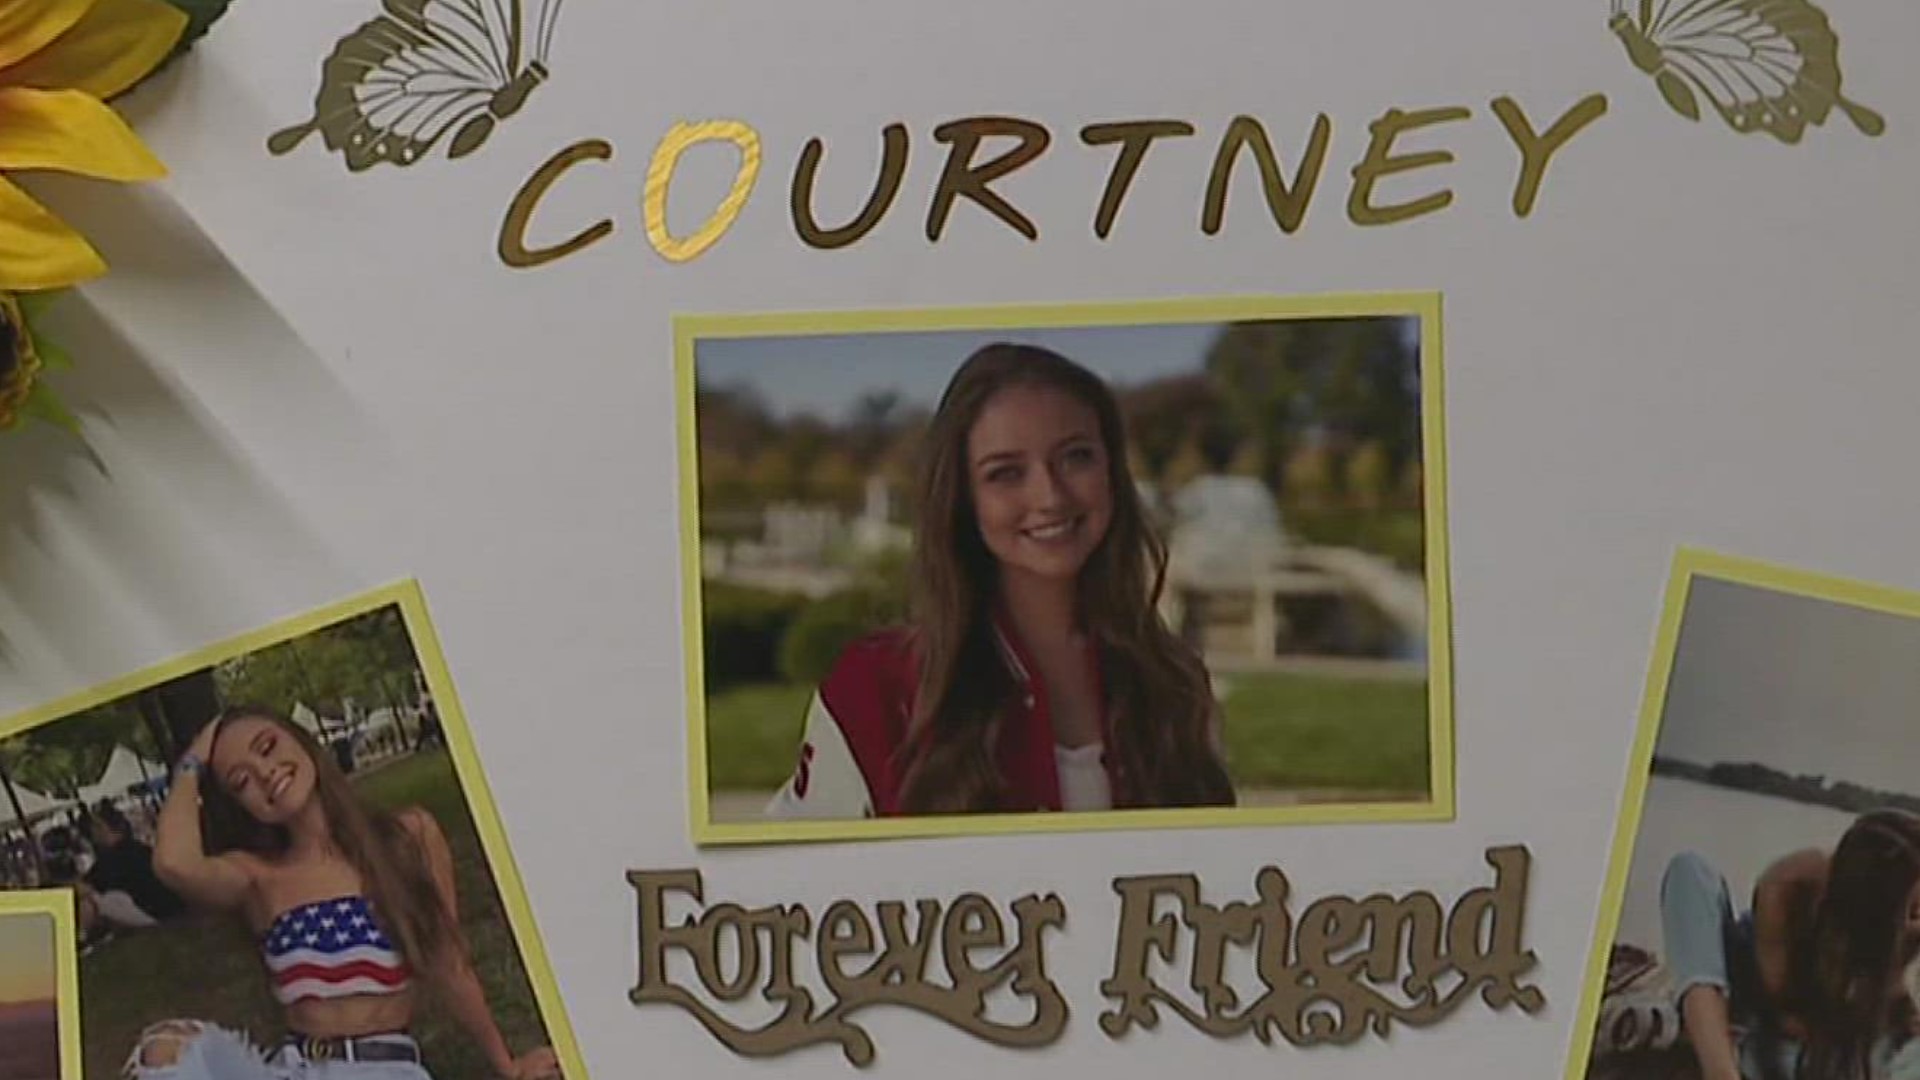 Girls on the school's volleyball team were remembering their late teammate, Courtney Groft, who died in a car crash last year.